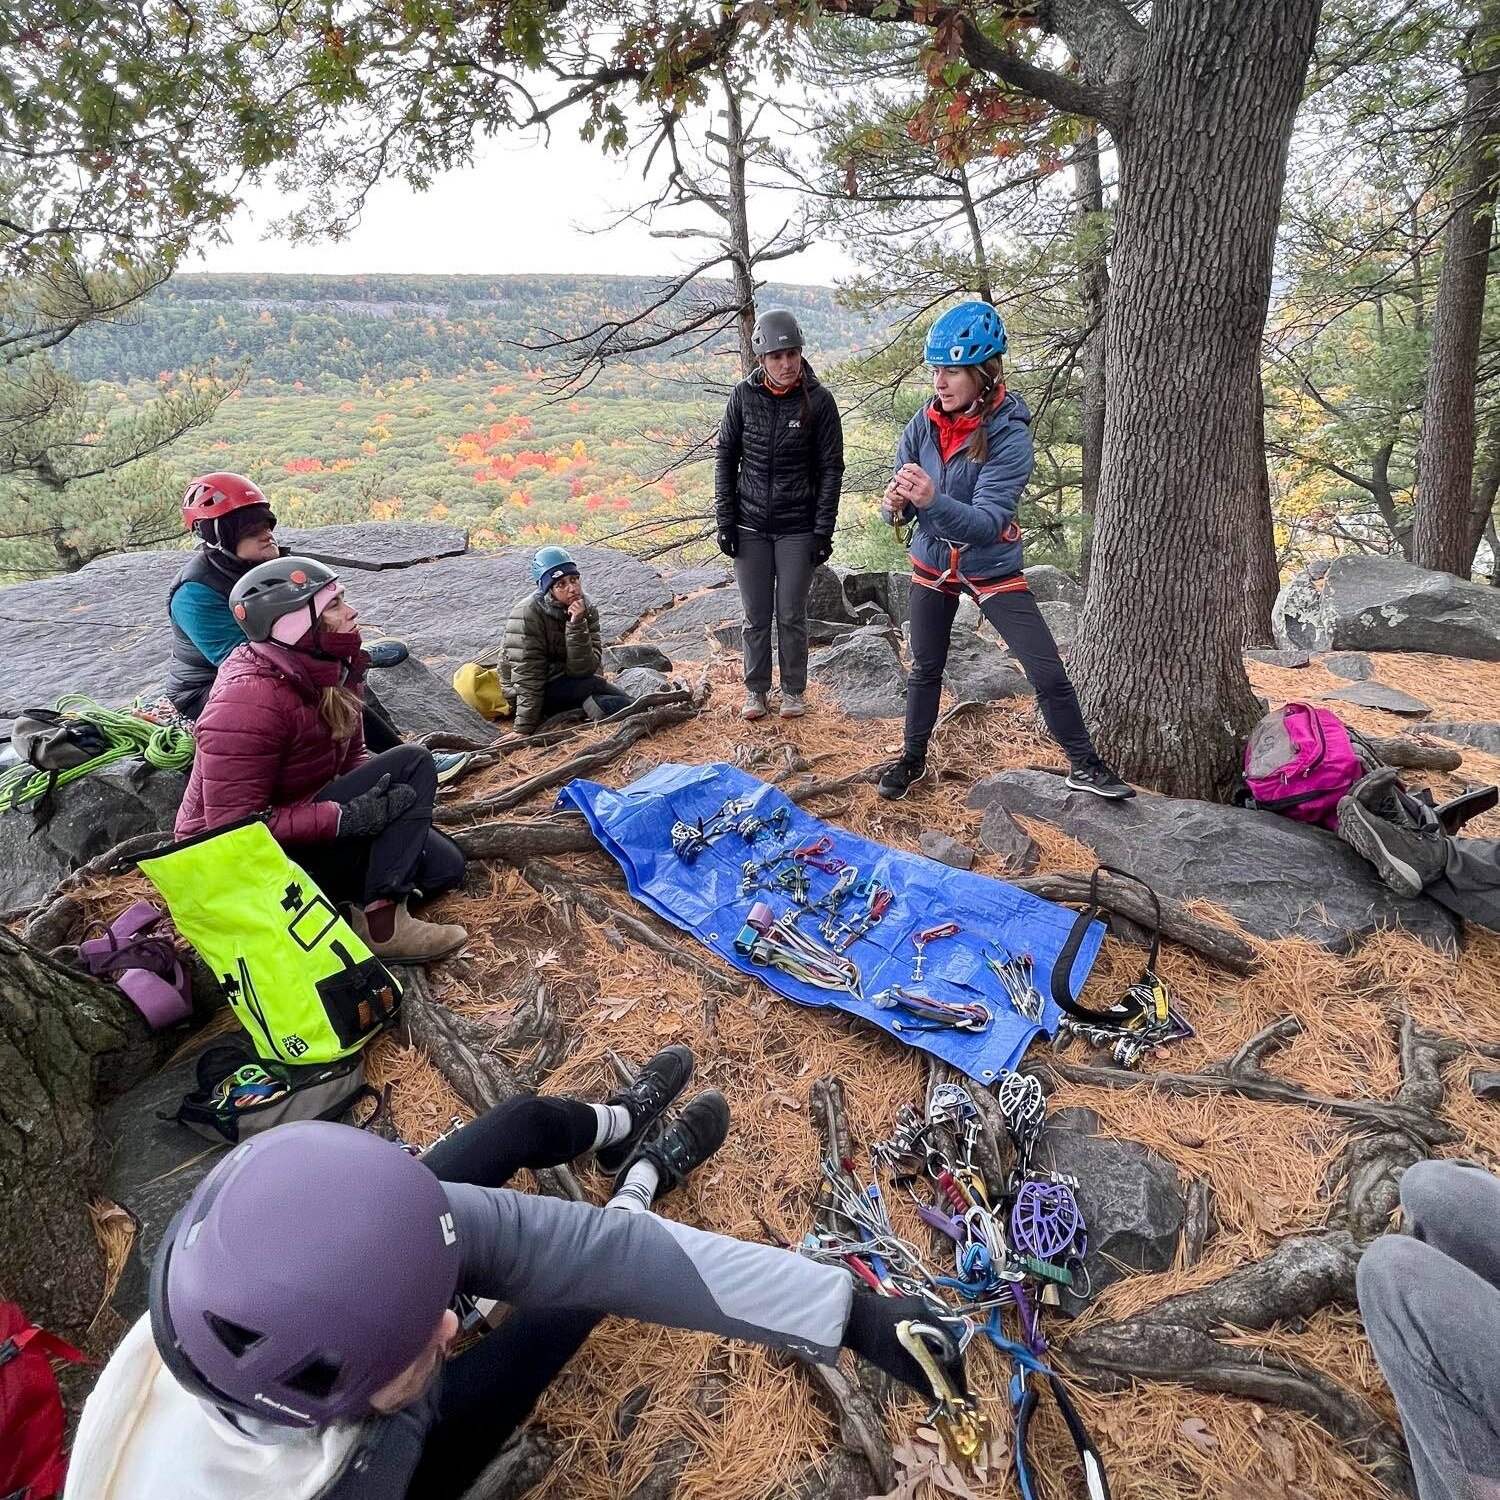 Last but certainly least... our final 2023 JEDI grant winner is...:
Devil's Lake Climbing Guides has received funding from the JEDI grant to subsidize the cost of their 2-day anchor clinic for BIPOC climbers. WCA is excited to support this initiative